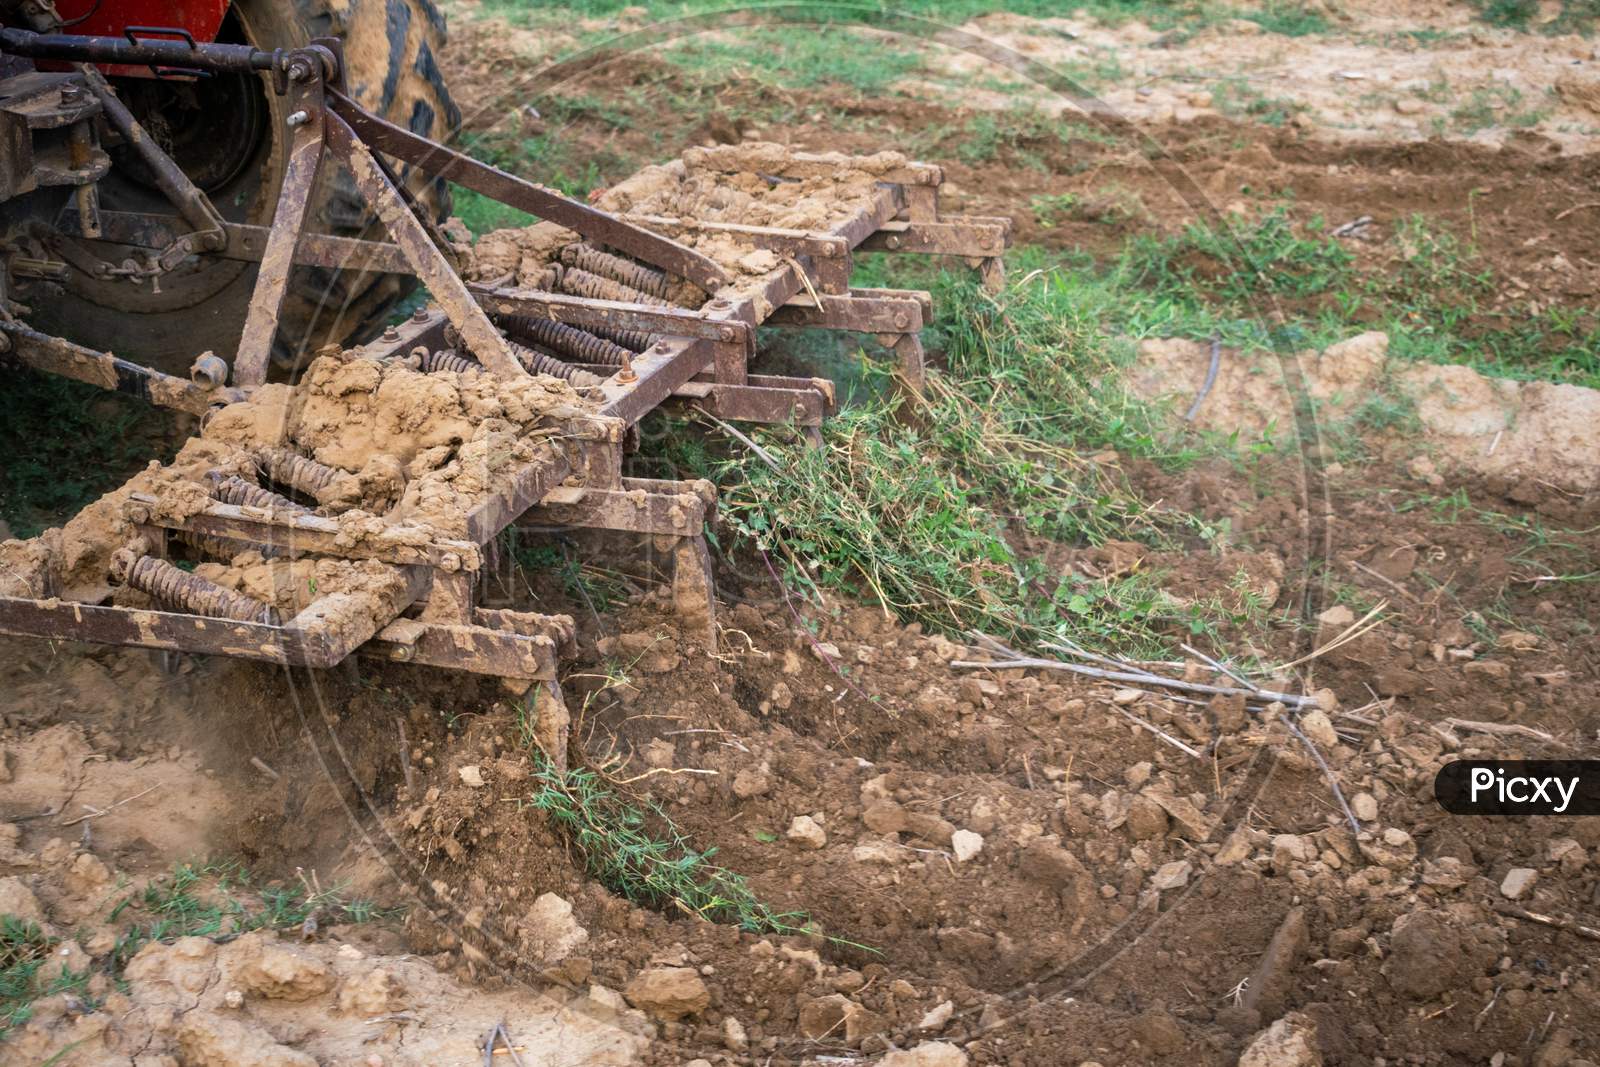 A plough of a tractor being used to plough a land for digging the soil in fields so that seeds can be planted during monsoon or rainy season in Rajasthan